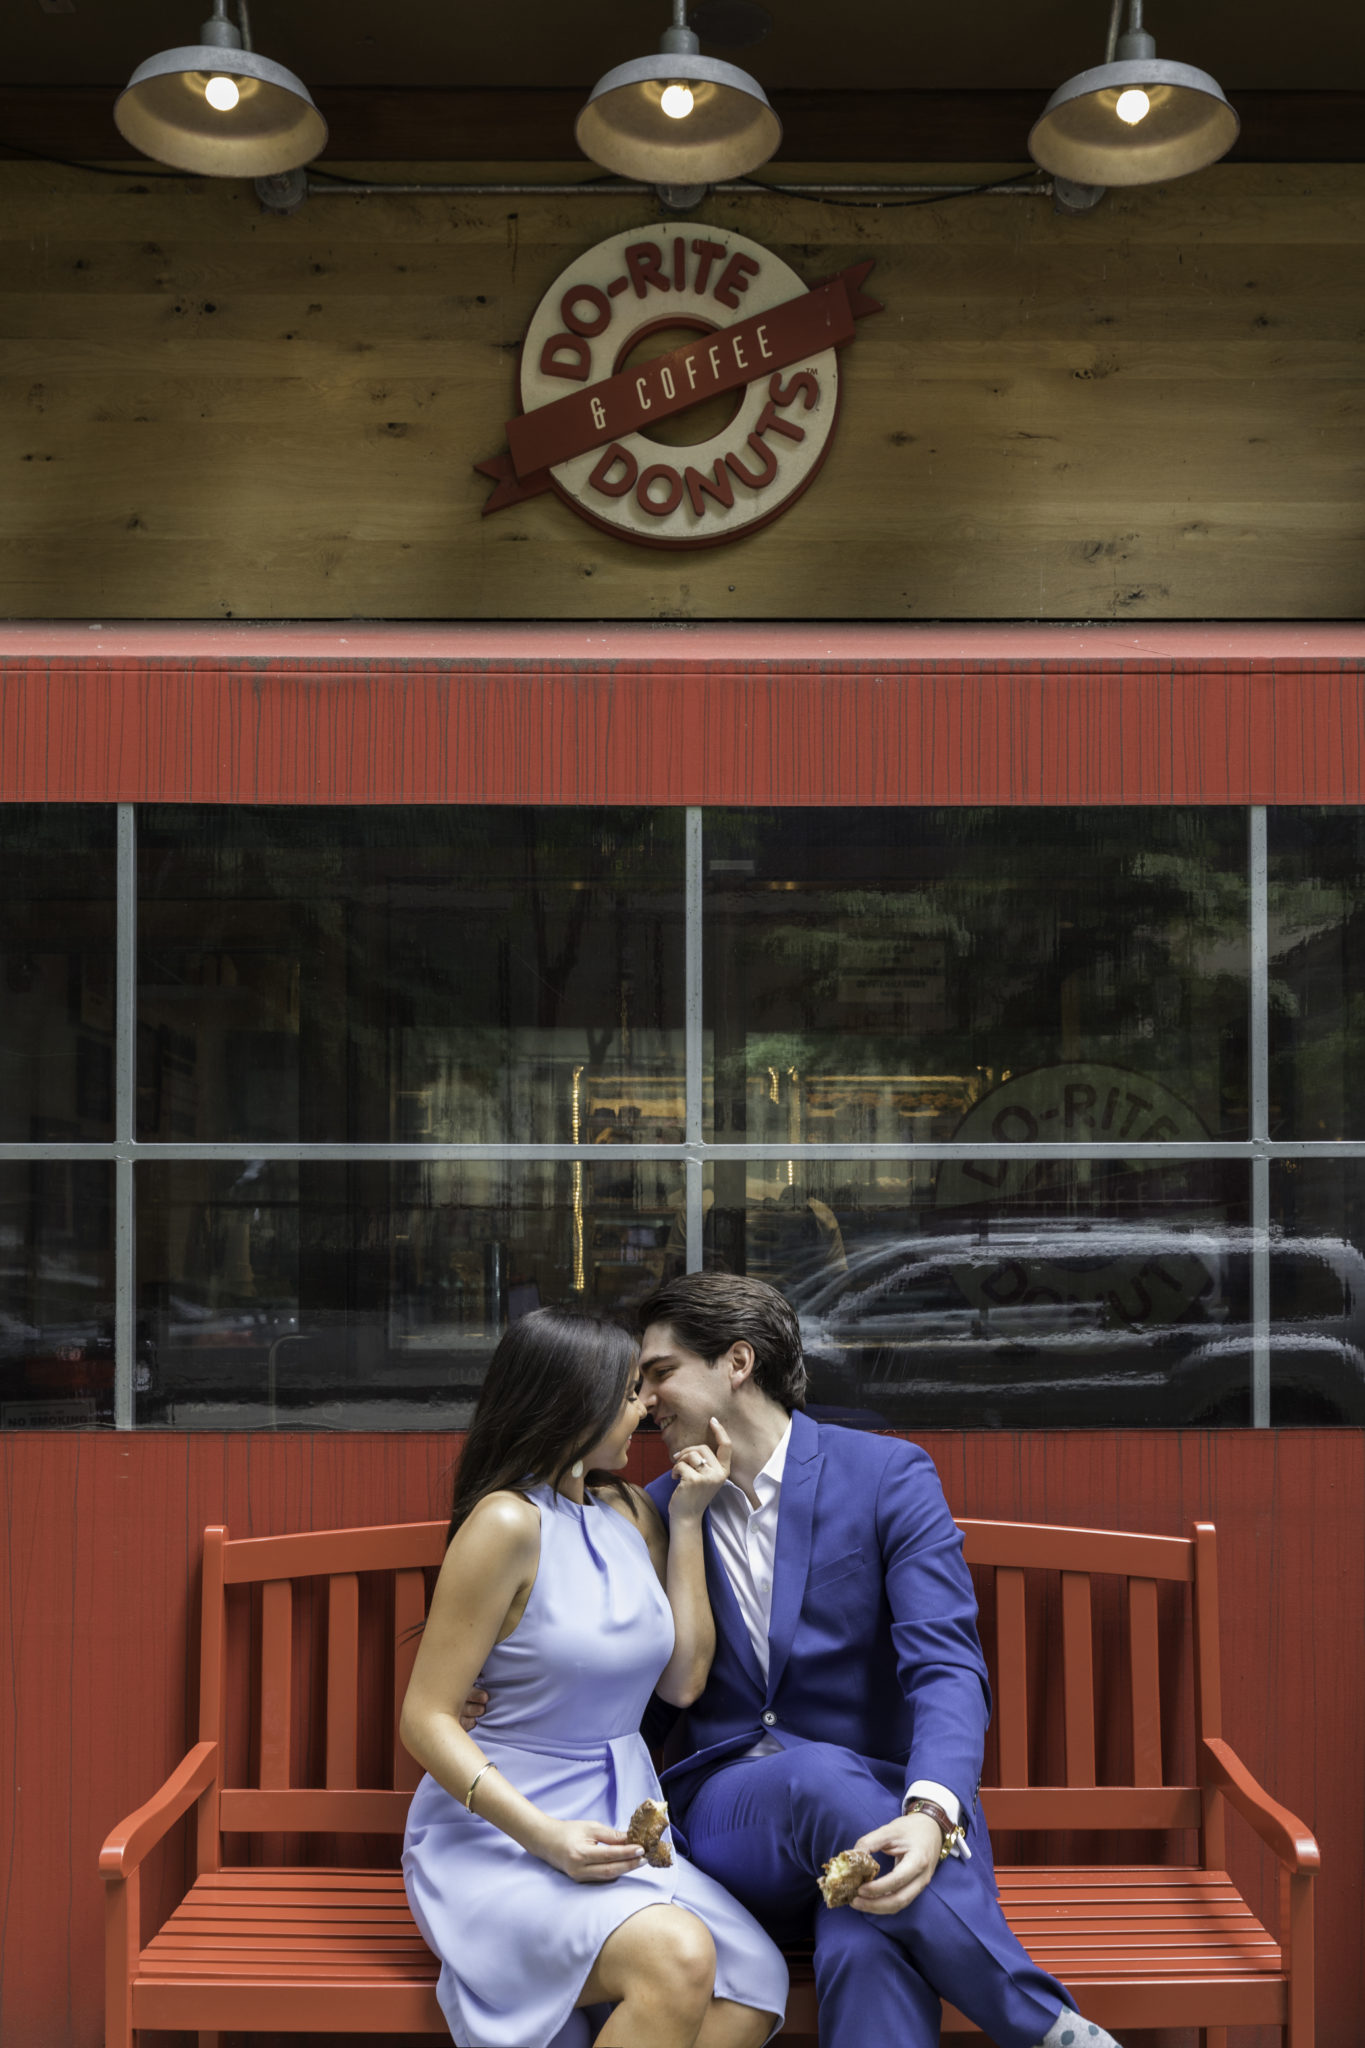 Julie + Ryan’s Chicago Engagement Session